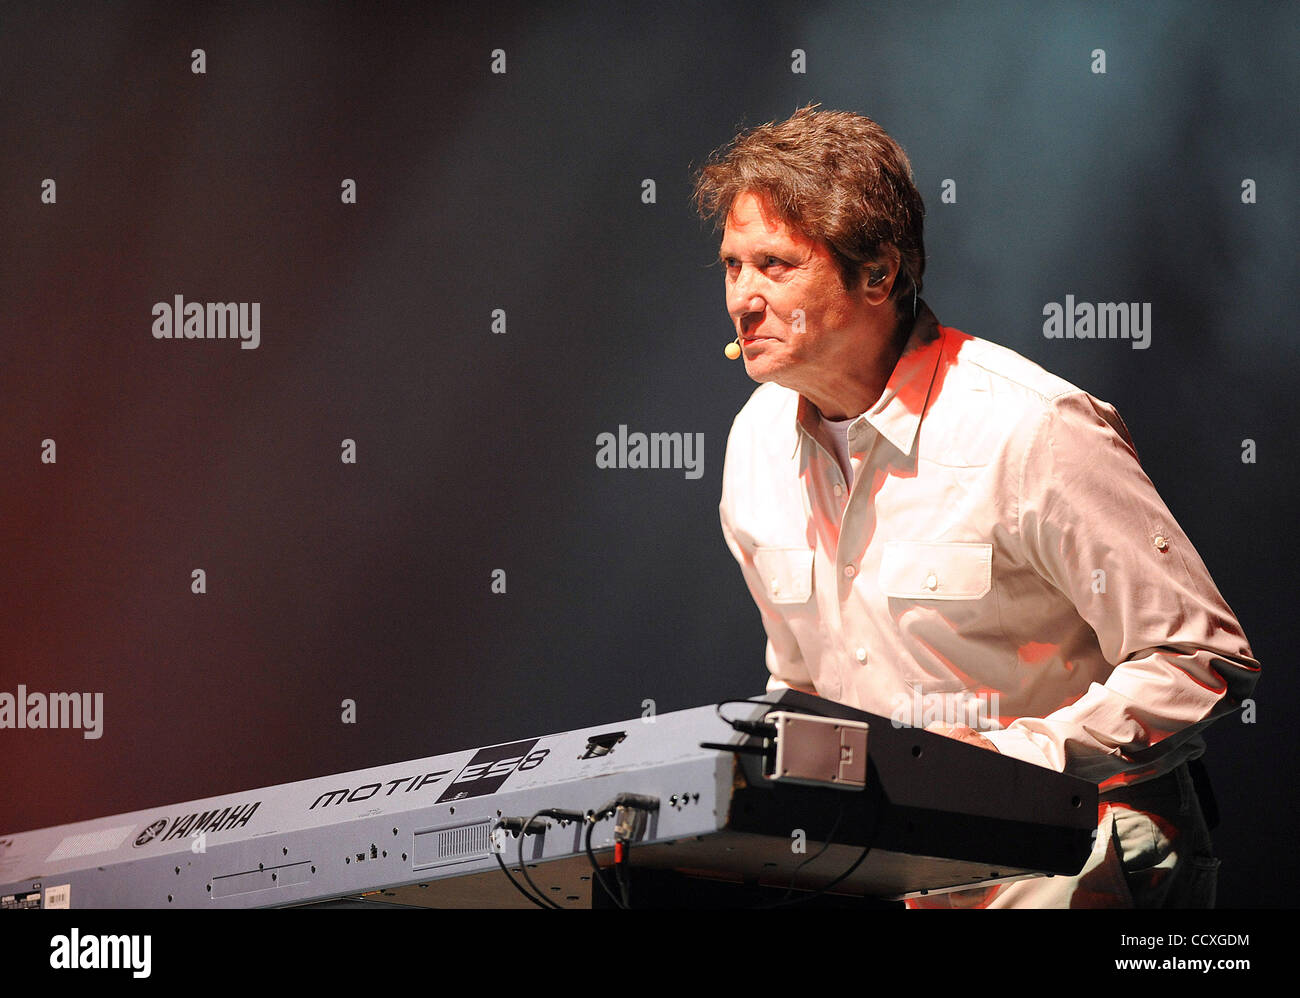 May 18, 2010 - Durham, North Carolina; USA - Musician ROBERT LAMM of the band Chicago performs live as their 2010 tour makes a stop at the Durham Performing Arts Center located in Durham.  Copyright 2010 Jason Moore. Stock Photo